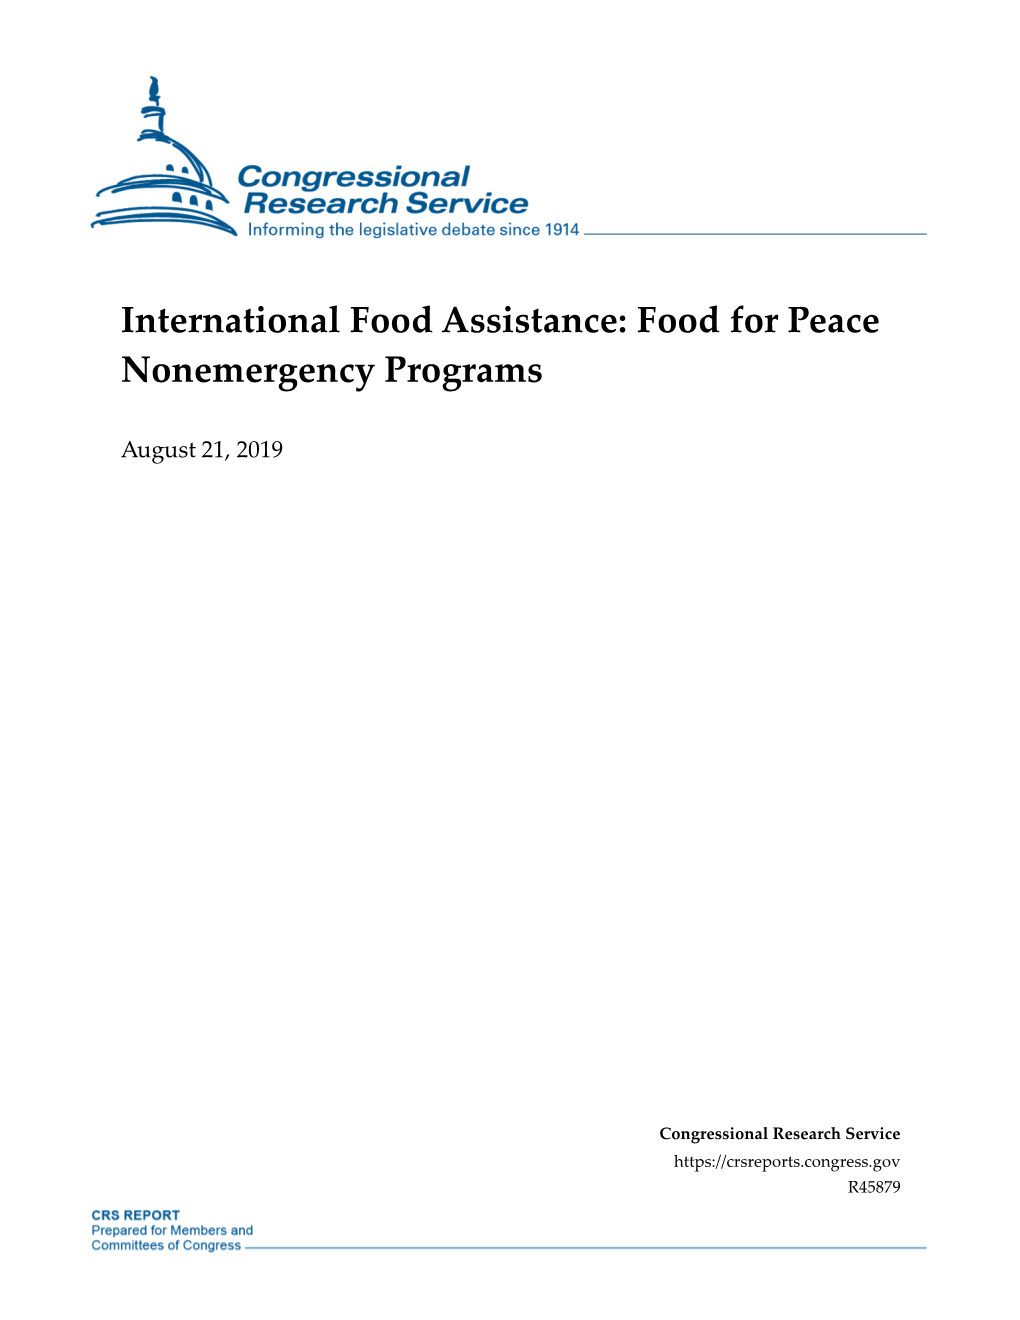 International Food Assistance: Food for Peace Nonemergency Programs